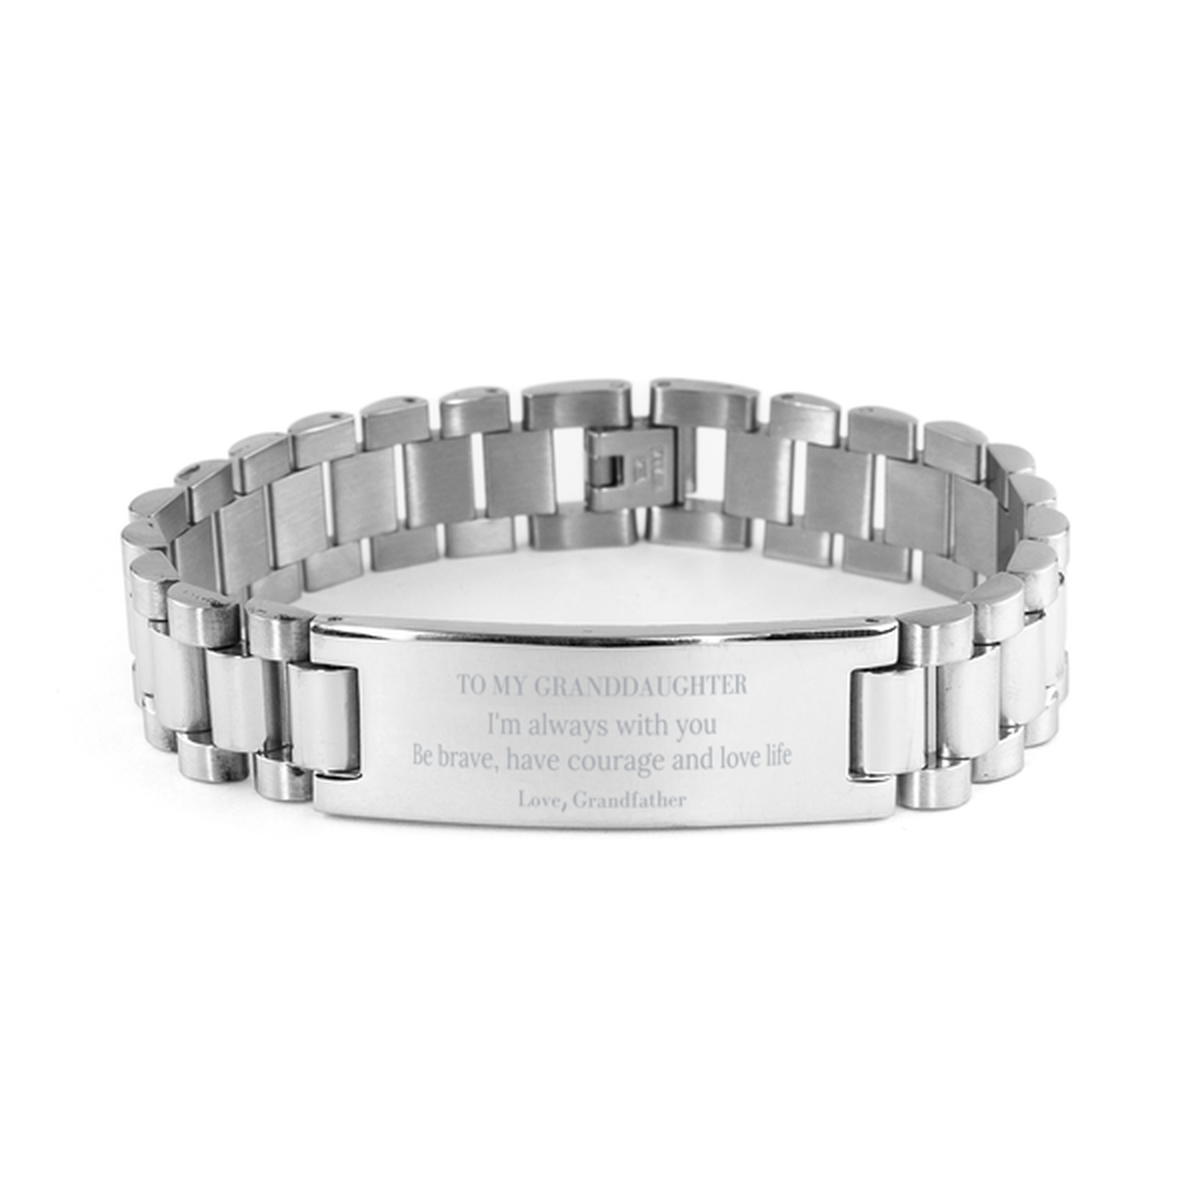 To My Granddaughter Gifts from Grandfather, Unique Ladder Stainless Steel Bracelet Inspirational Christmas Birthday Graduation Gifts for Granddaughter I'm always with you. Be brave, have courage and love life. Love, Grandfather